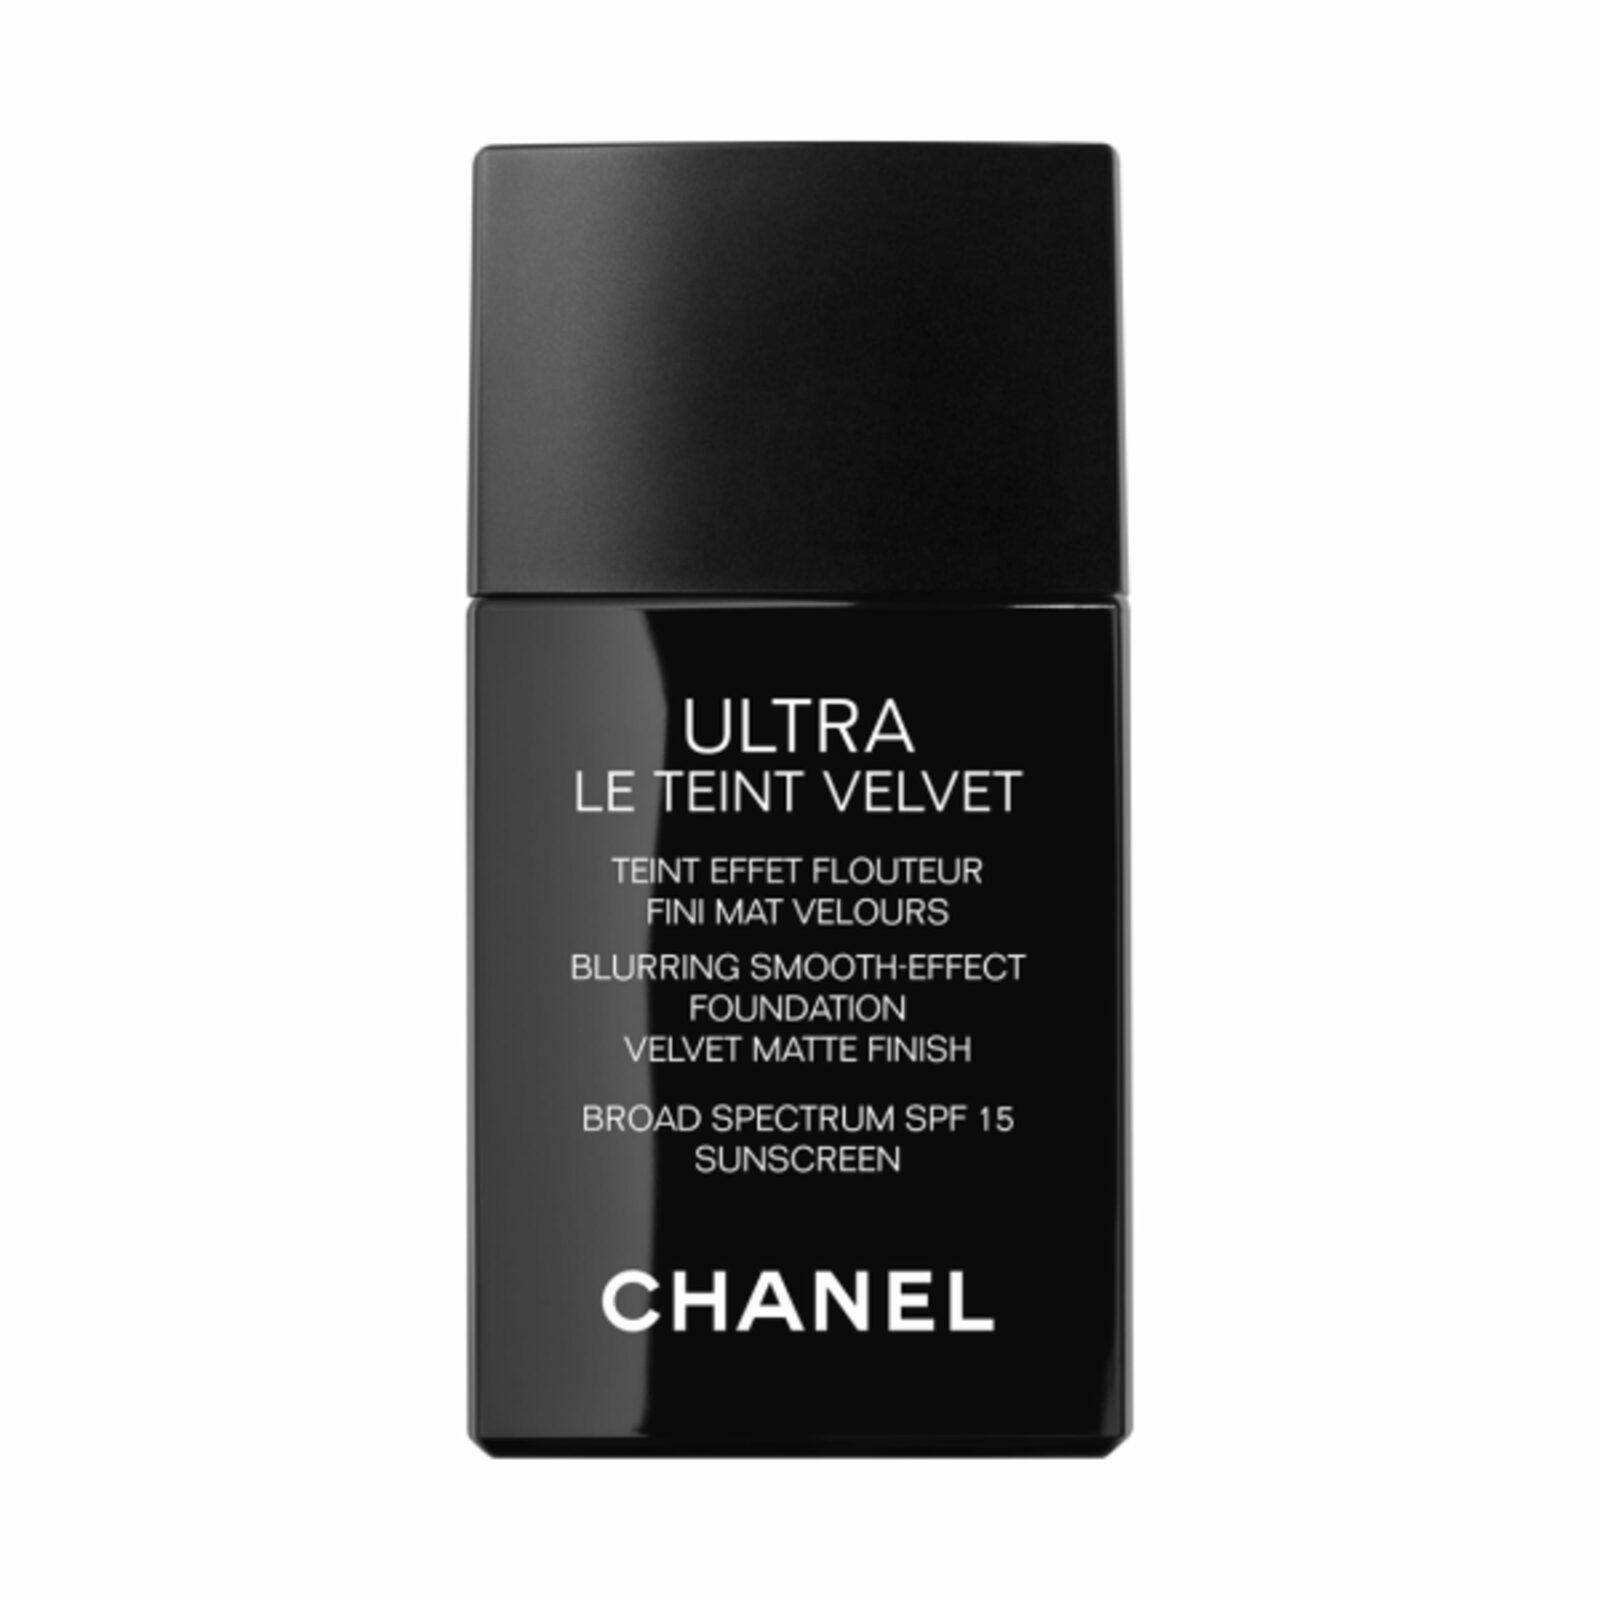 Chanel's New No. 1 Revitalizing Serum: An Honest Review